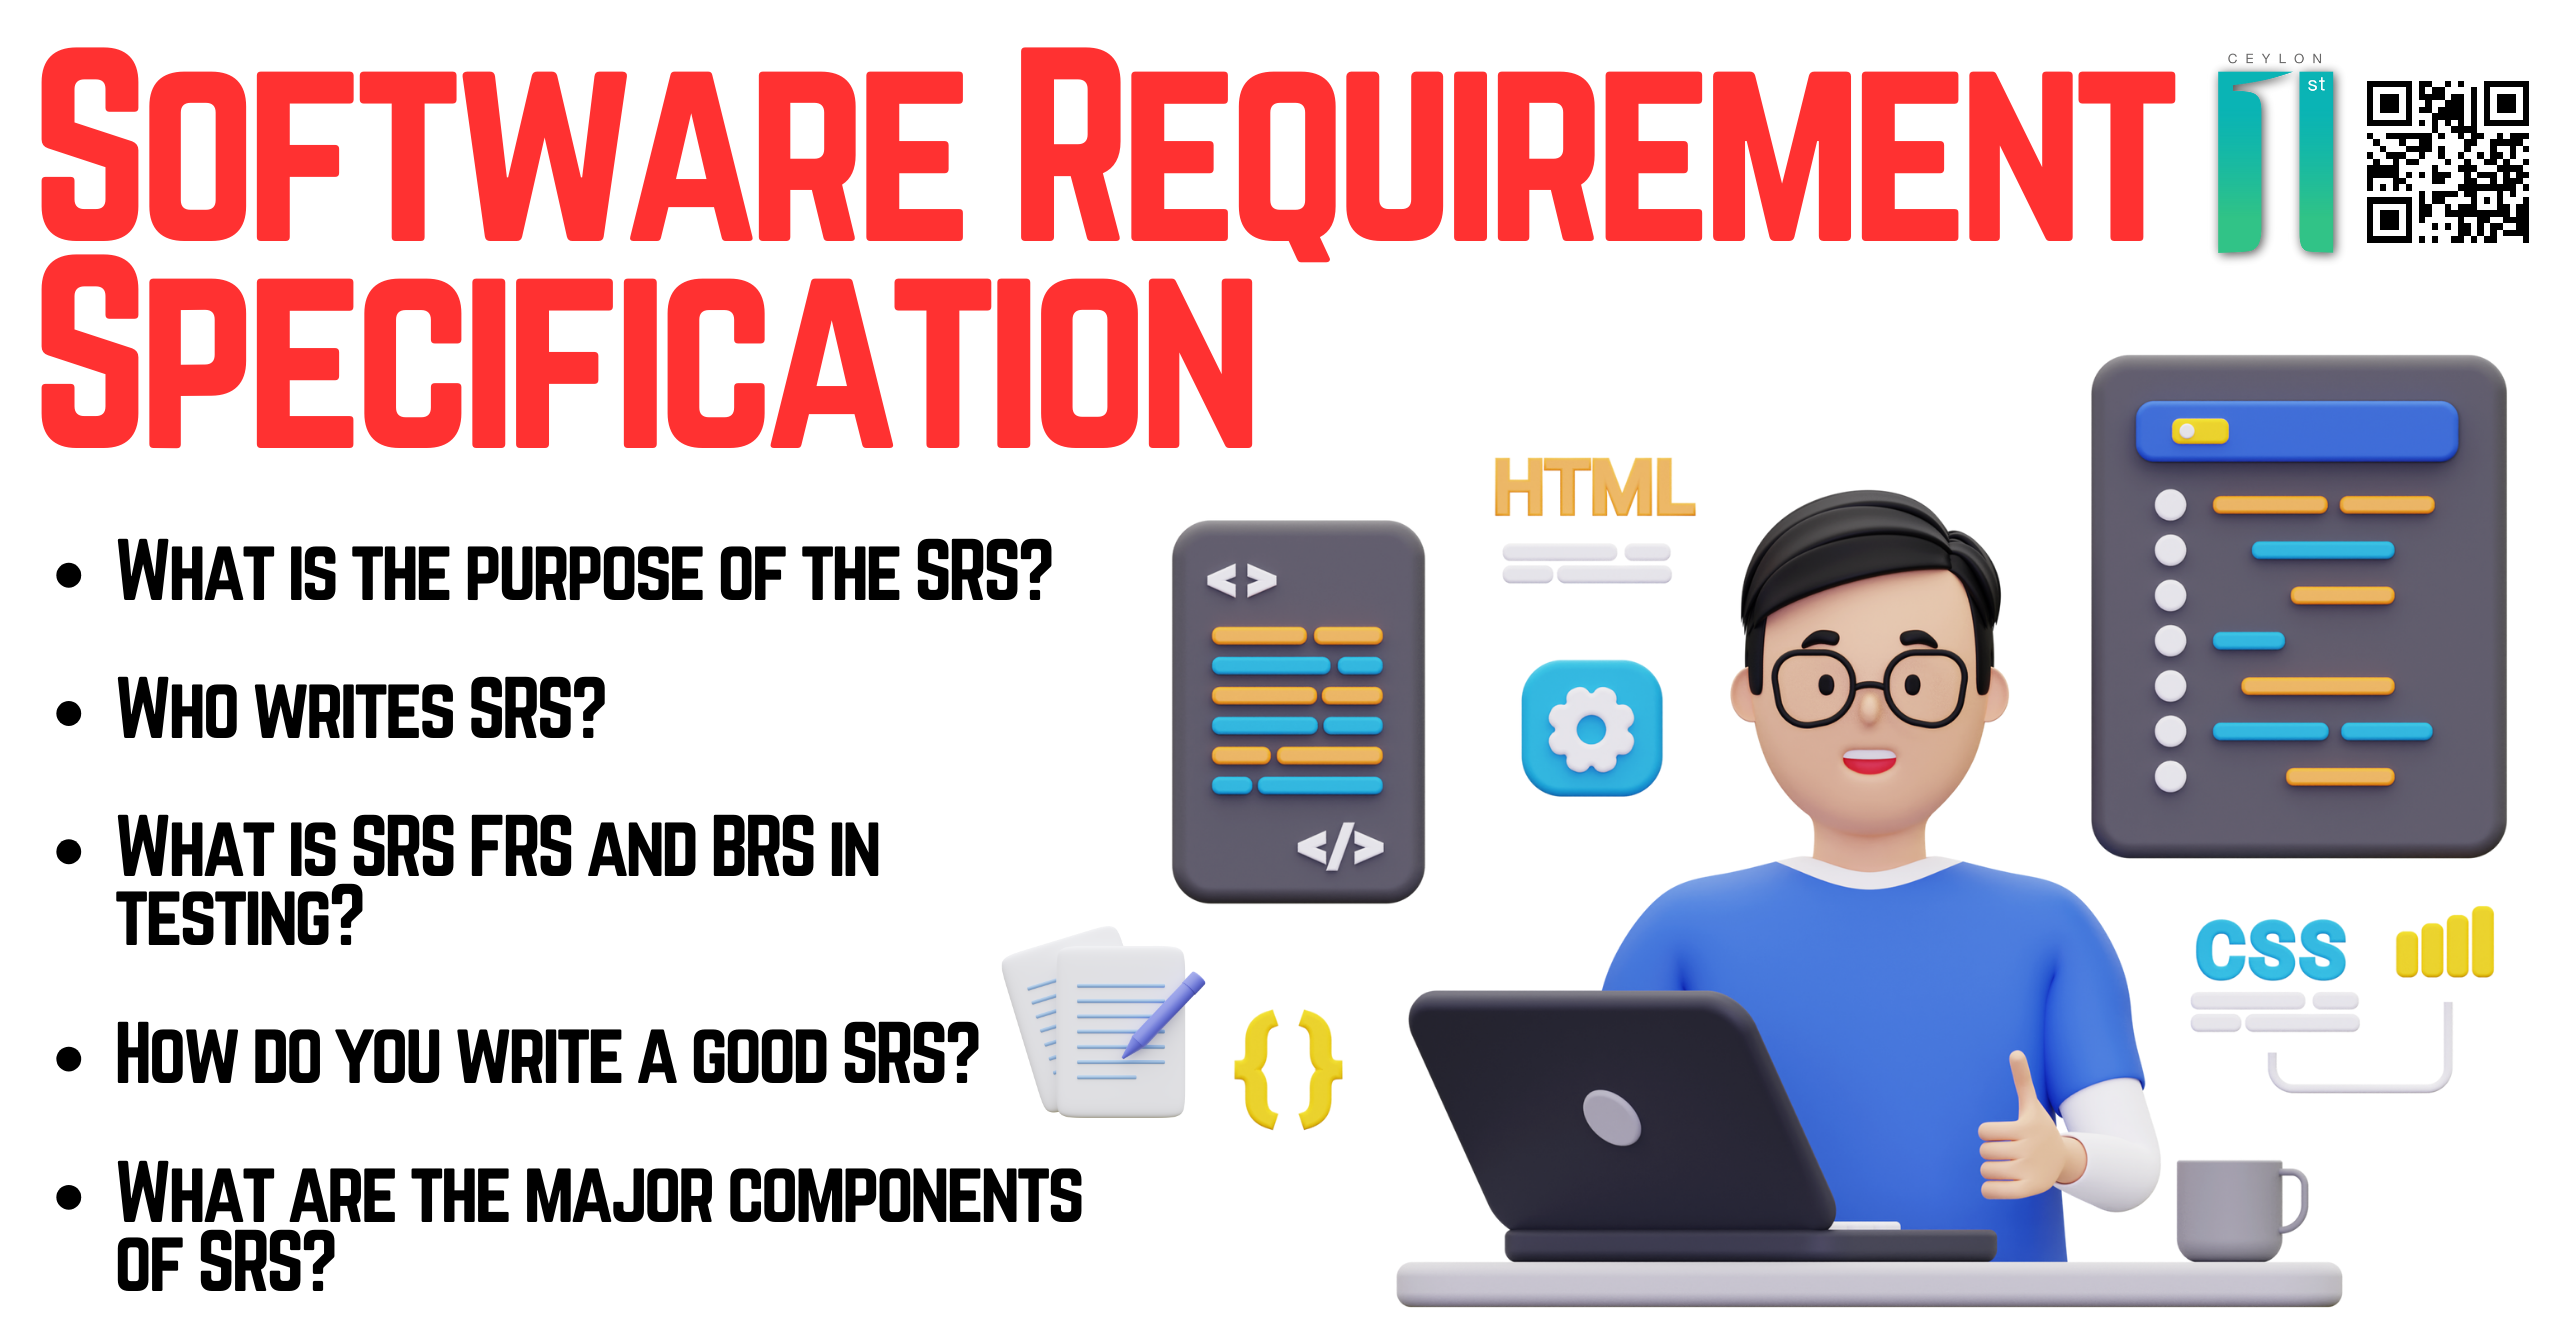 Software Requirement Specification (SRS)